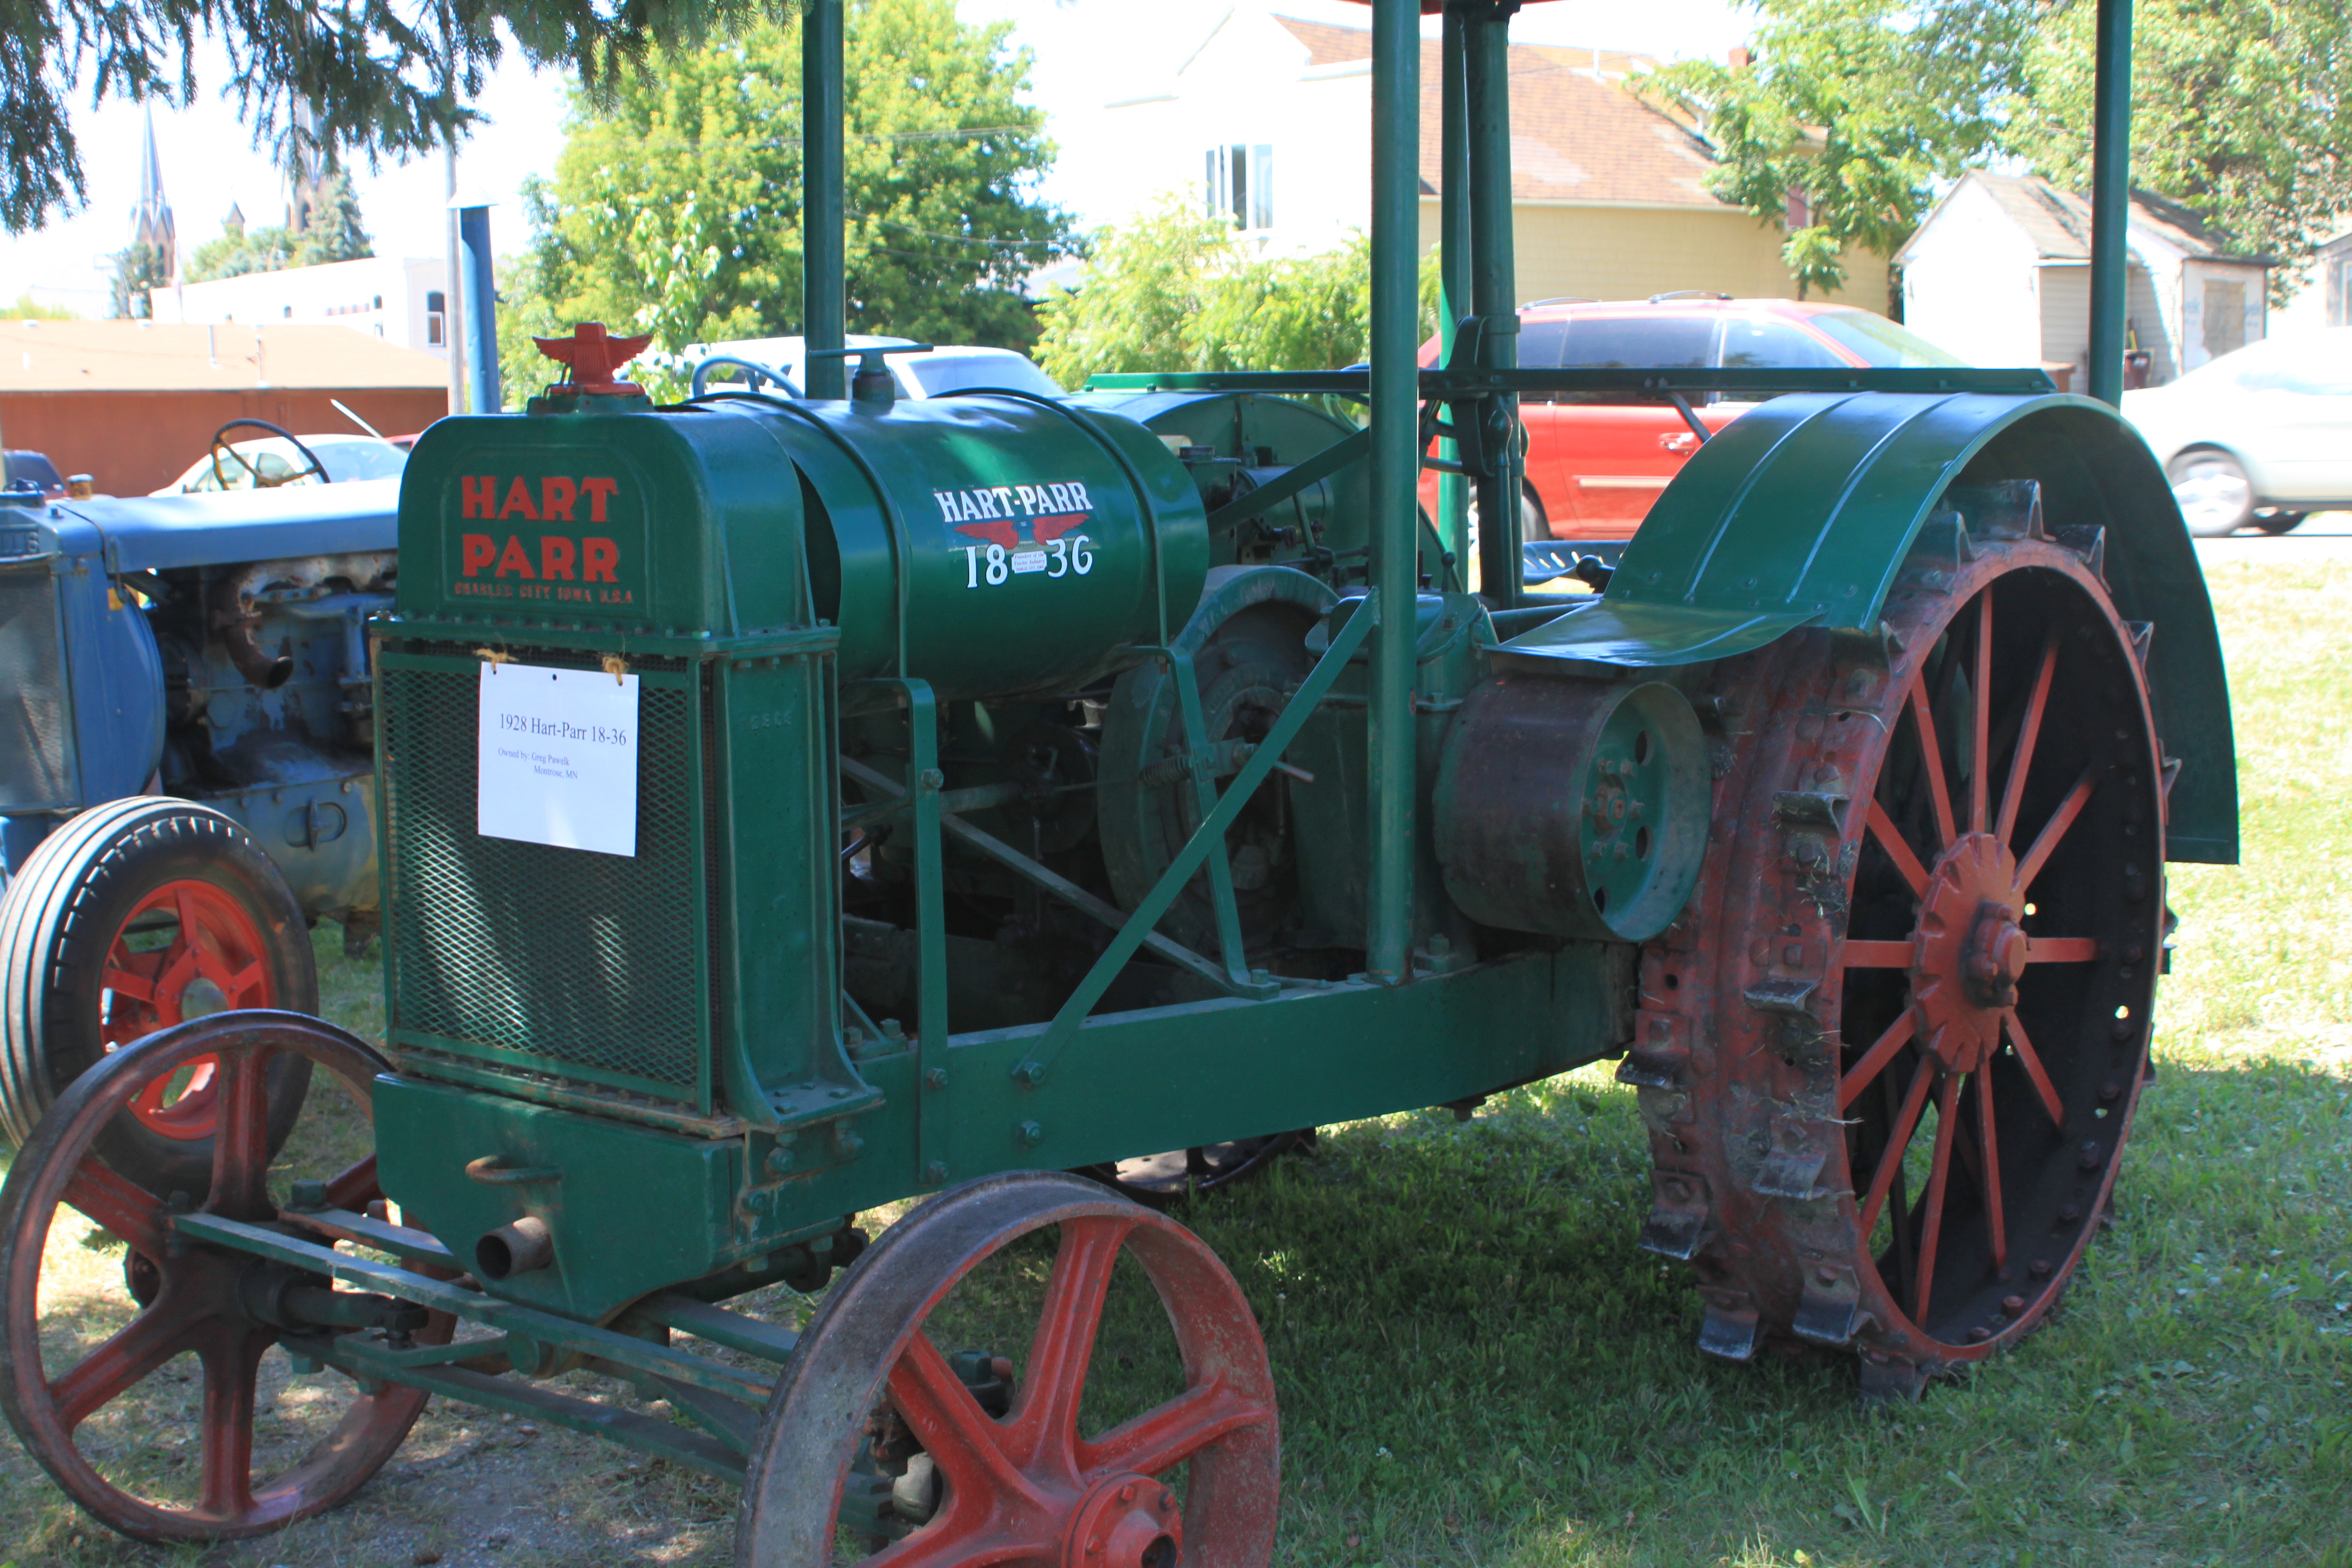 File:Hart-Parr 18-36 Tractor.jpg - Wikimedia Commons